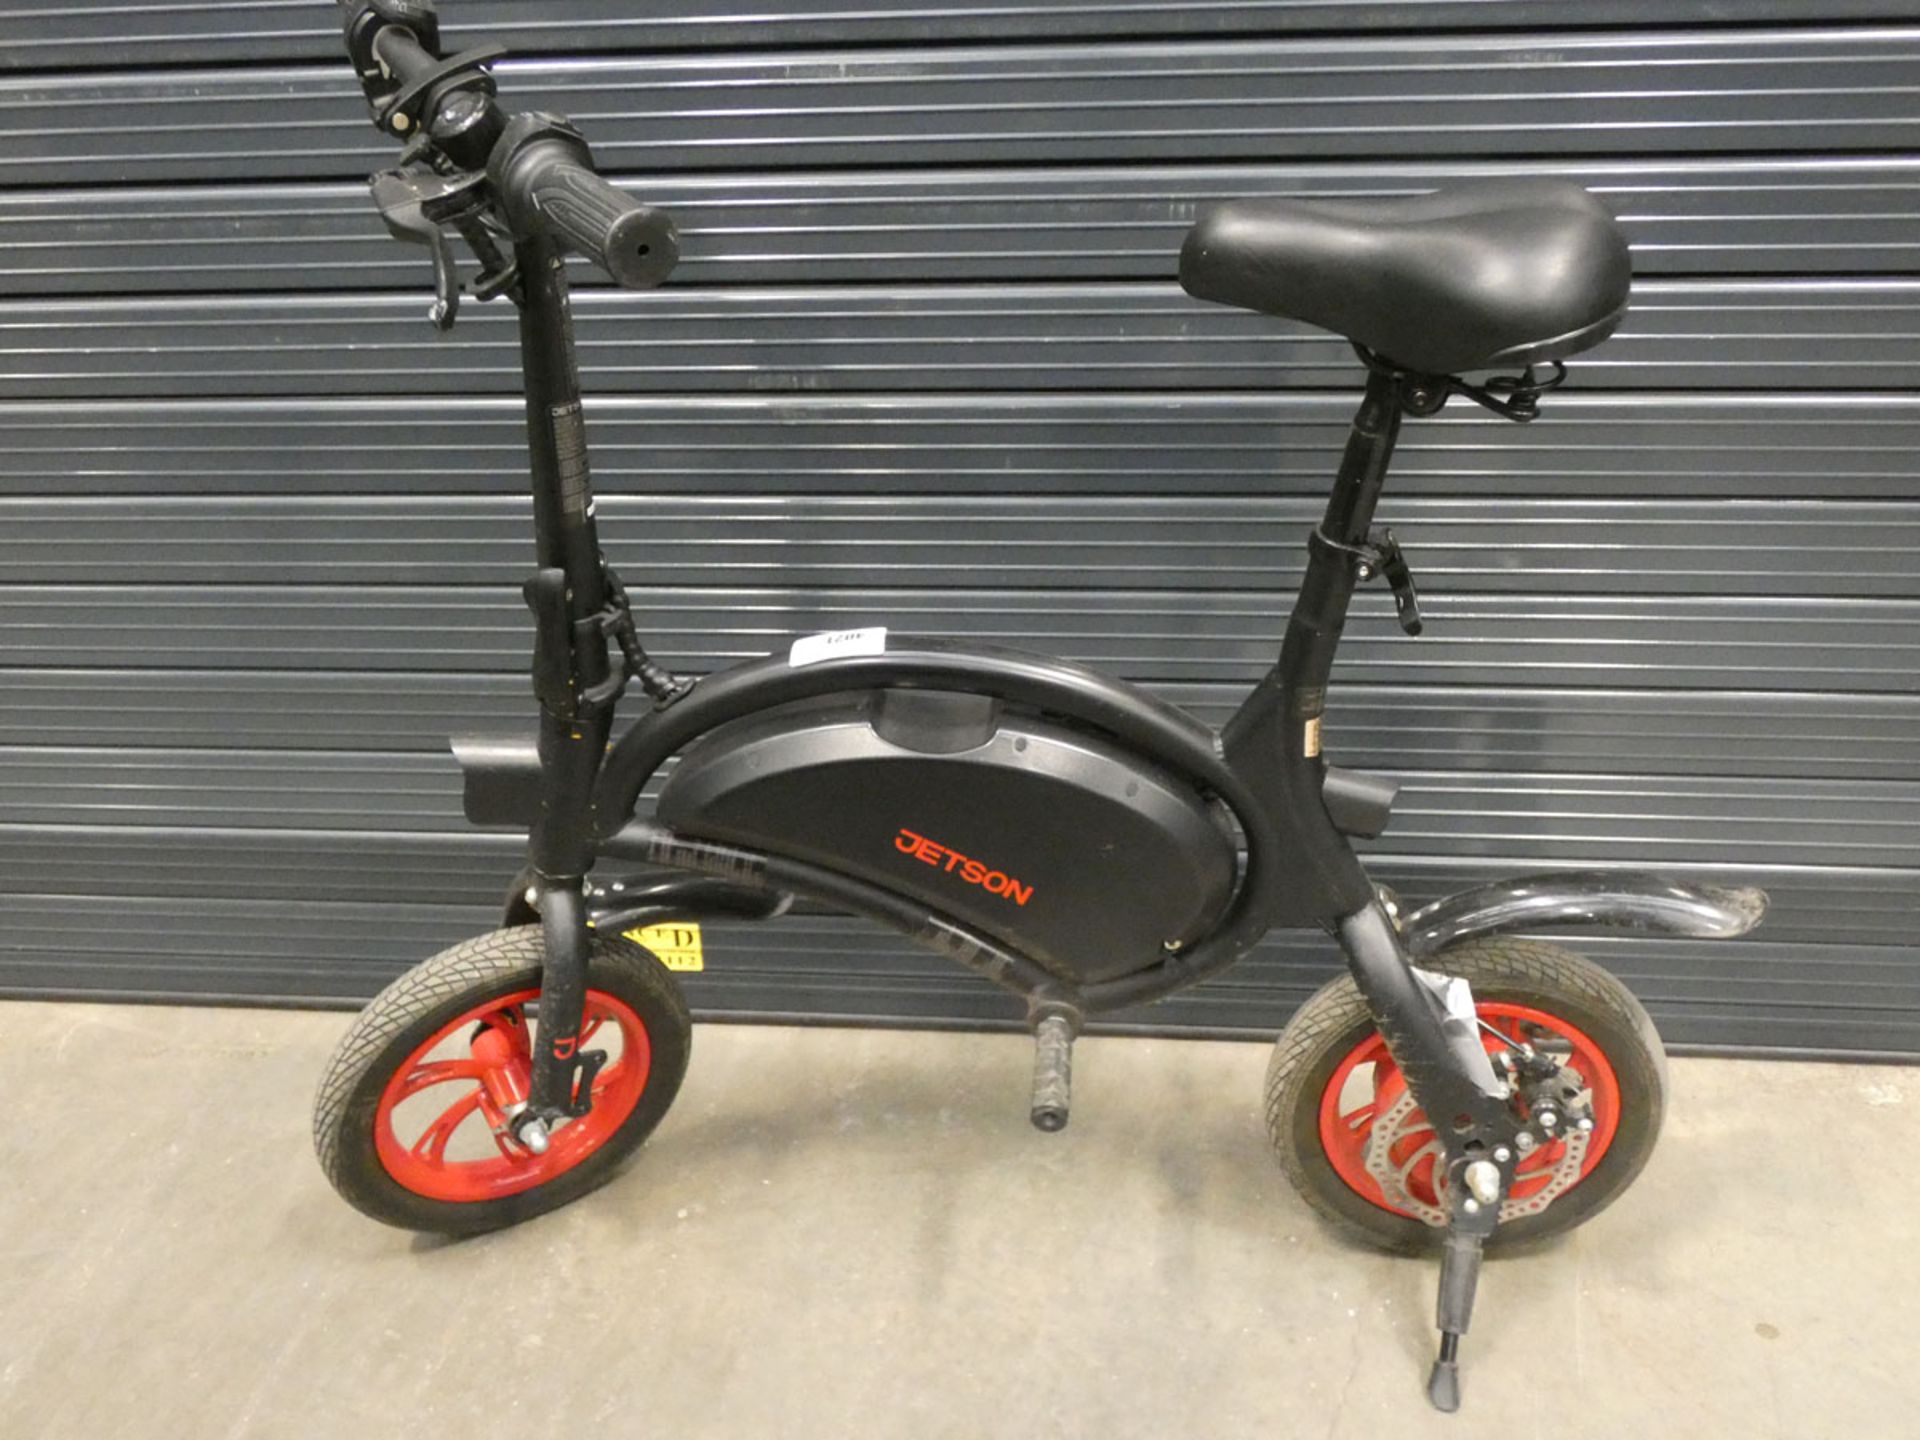 Jetson electric bike, no charger